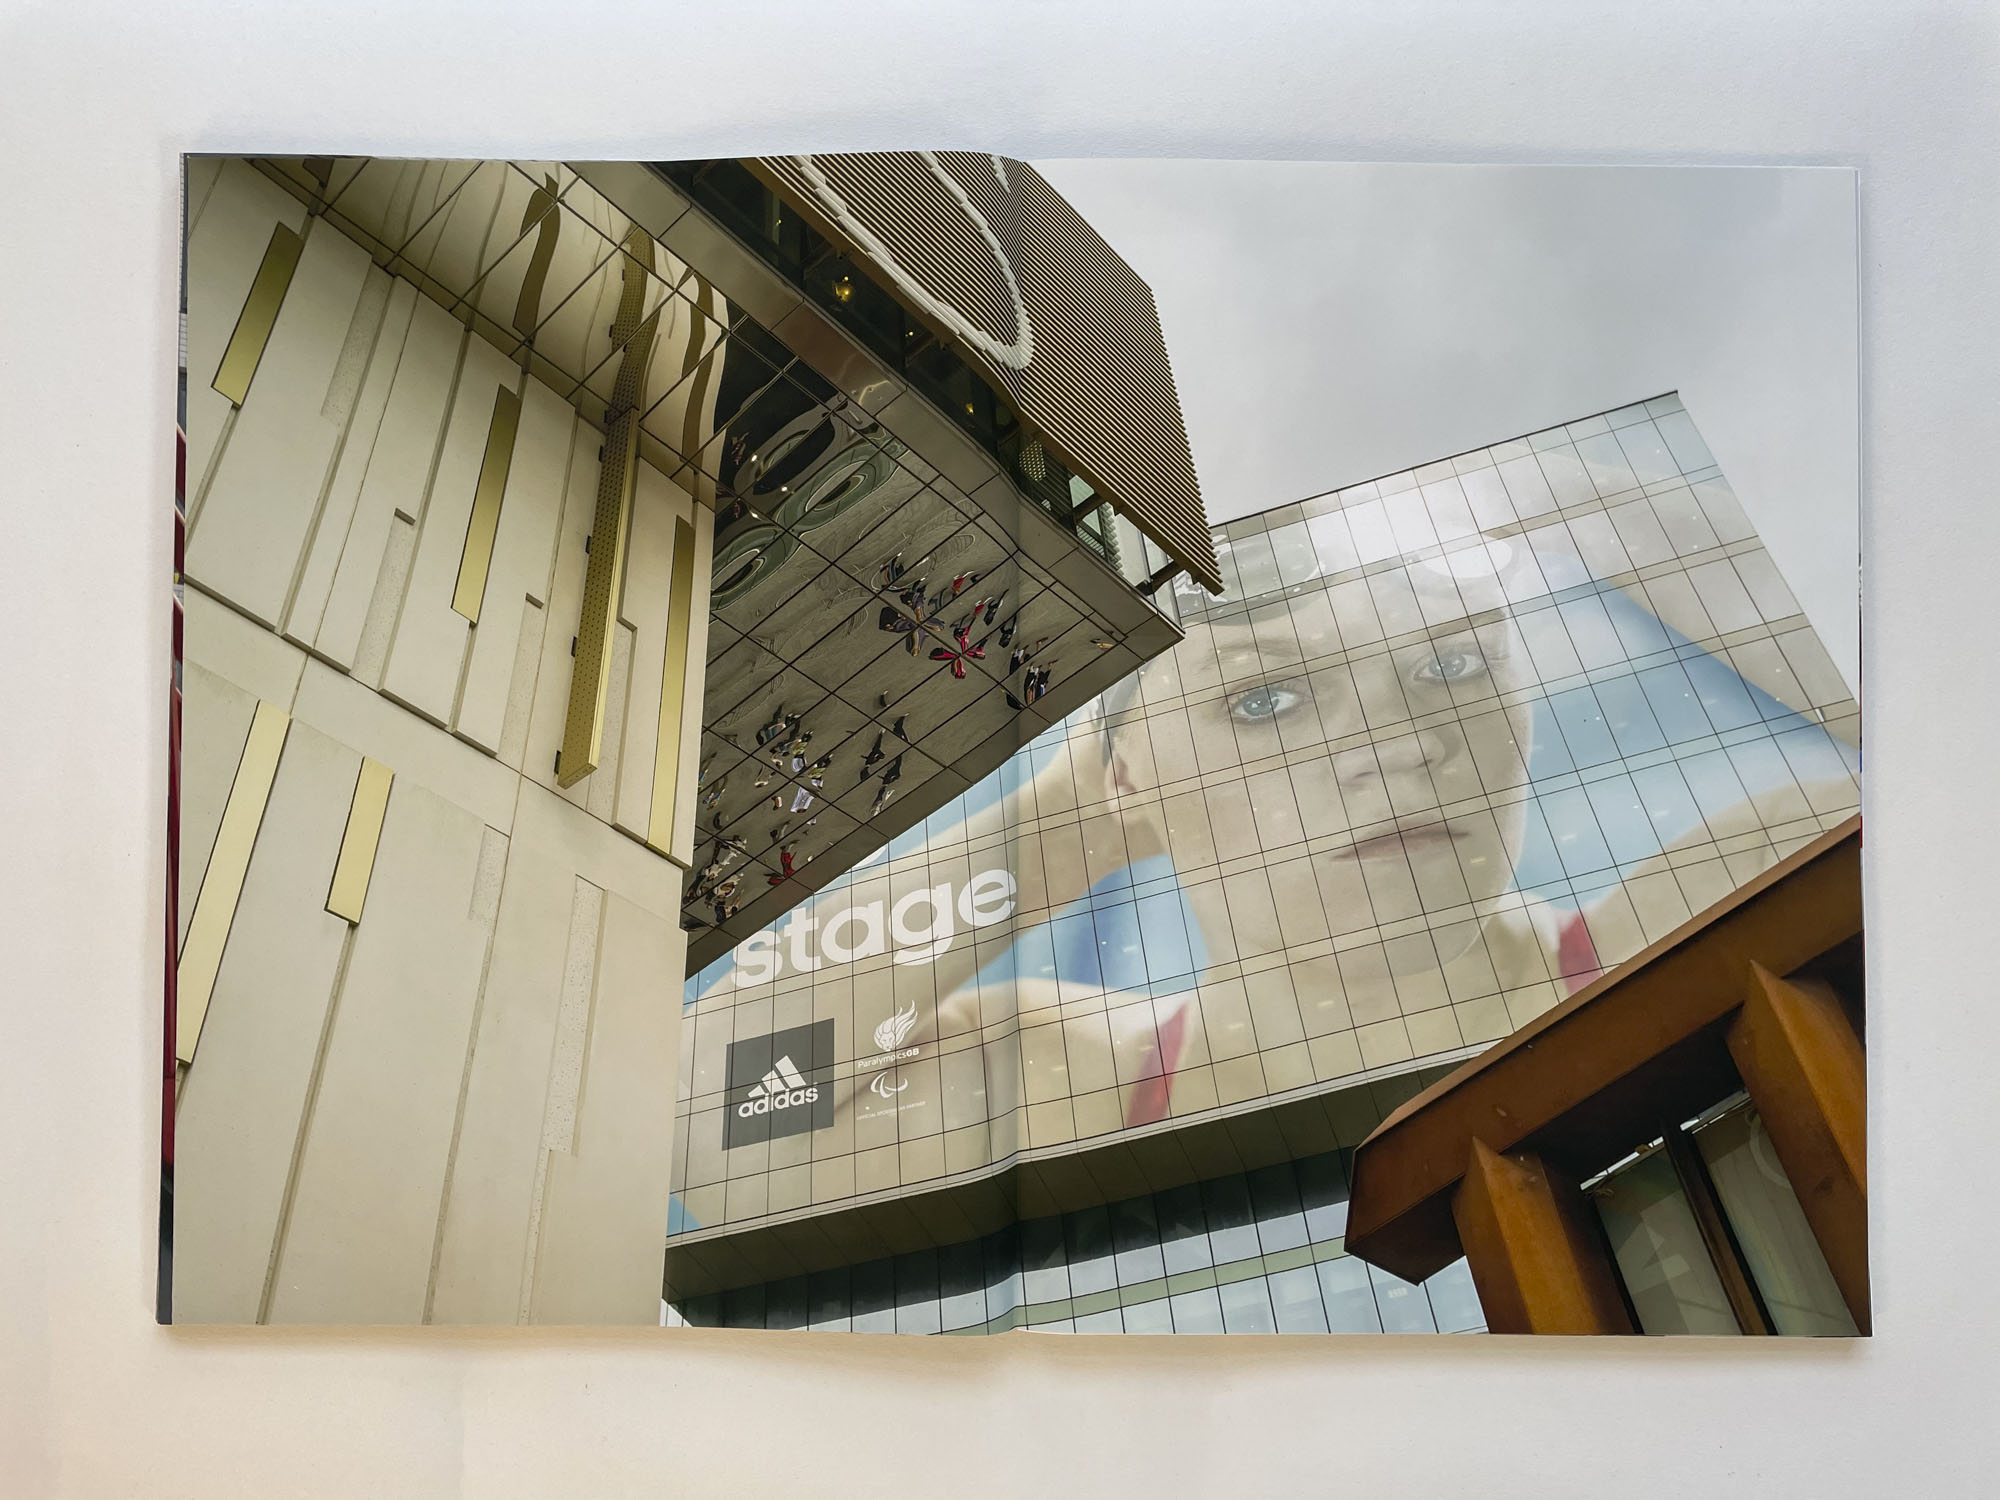 looking up at the facade of two new buildings, on one the face of a swimmer looms large, on the underside of part of the other building can be seen the distorted reflections of people